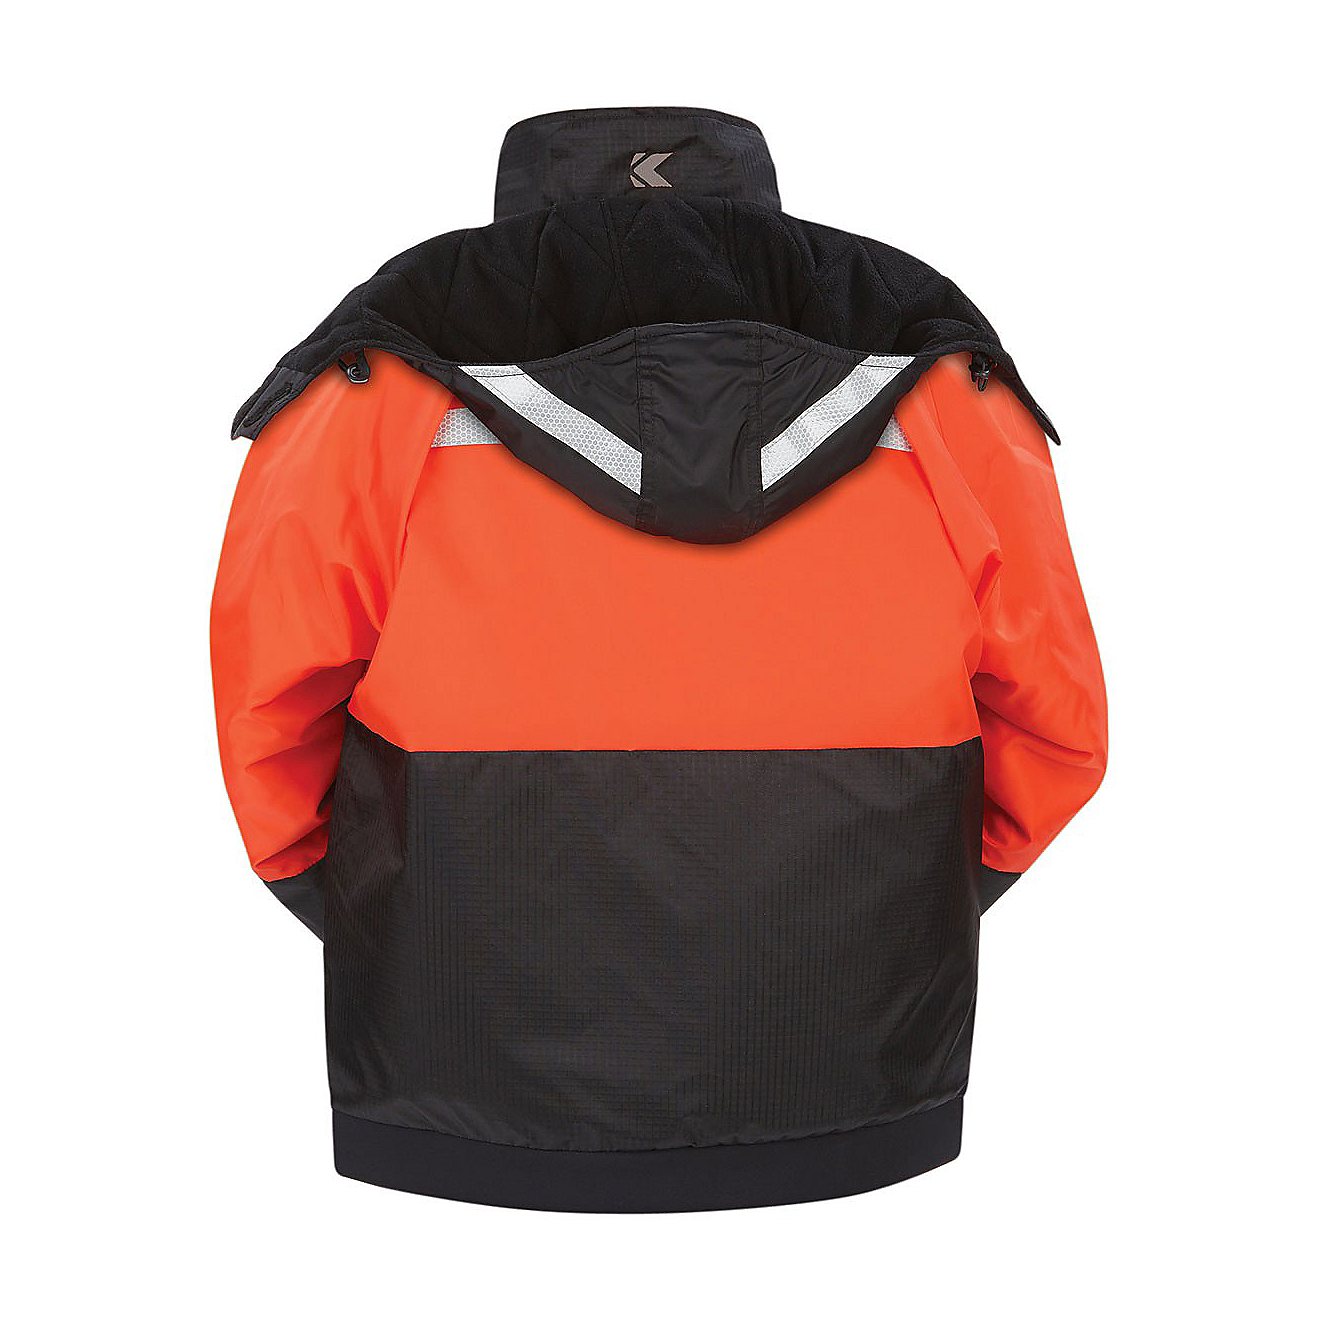 Onyx Outdoor Deluxe Flotation Jacket with ArcticShield Technology Hood                                                           - view number 3